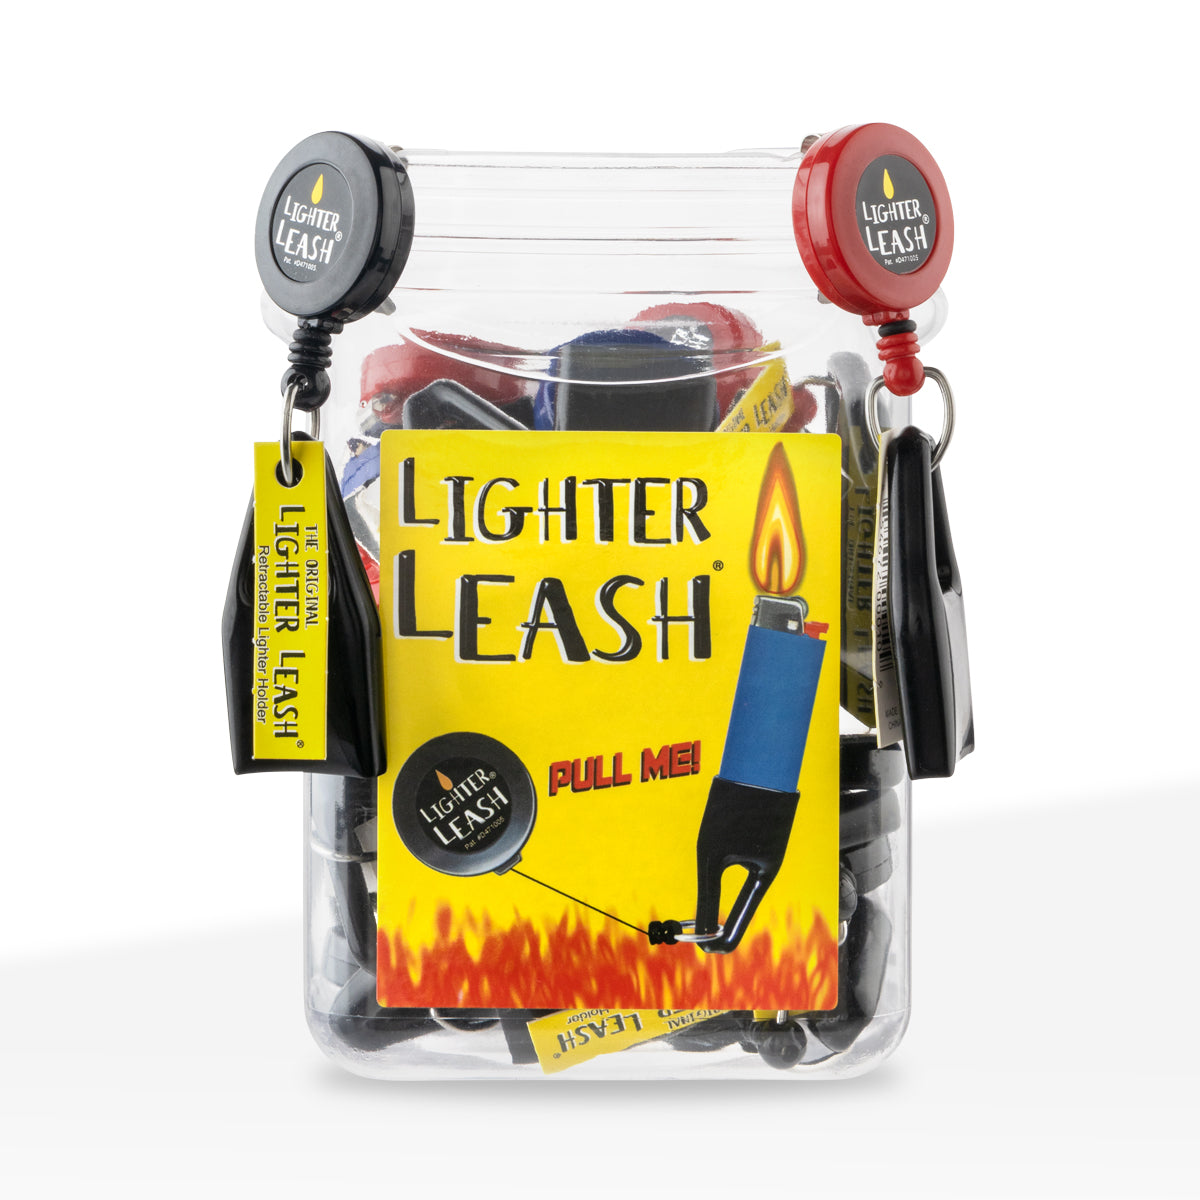 Lighter Leash | Assorted - 30 Count